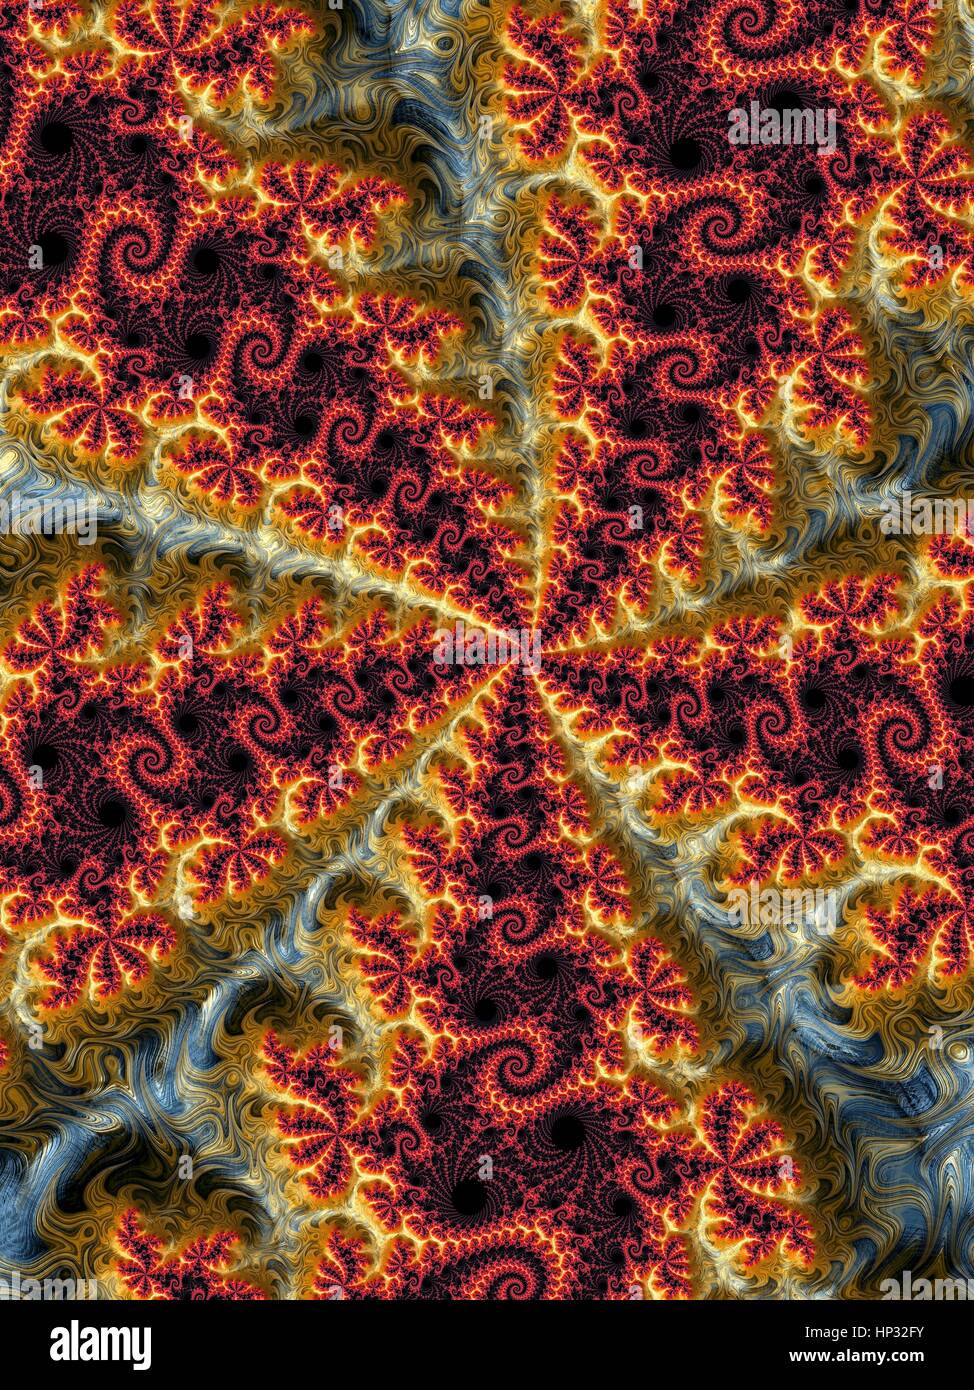 Julia fractal. Computer-generated dragon fractal derived from the Julia Set. Fractals are patterns that are formed by repeated subdivisions using some simple mathematical process. The large scale features of the pattern are repeated forever on an ever decreasing scale. The Julia Set is a class of shapes plotted from complex number coordinates. It was invented and studied during World War I by the French mathematicians Gaston Julia and Pierre Fatou. Fractals are used to model natural forms, such as snowflakes, and to study chaos theory. Stock Photo